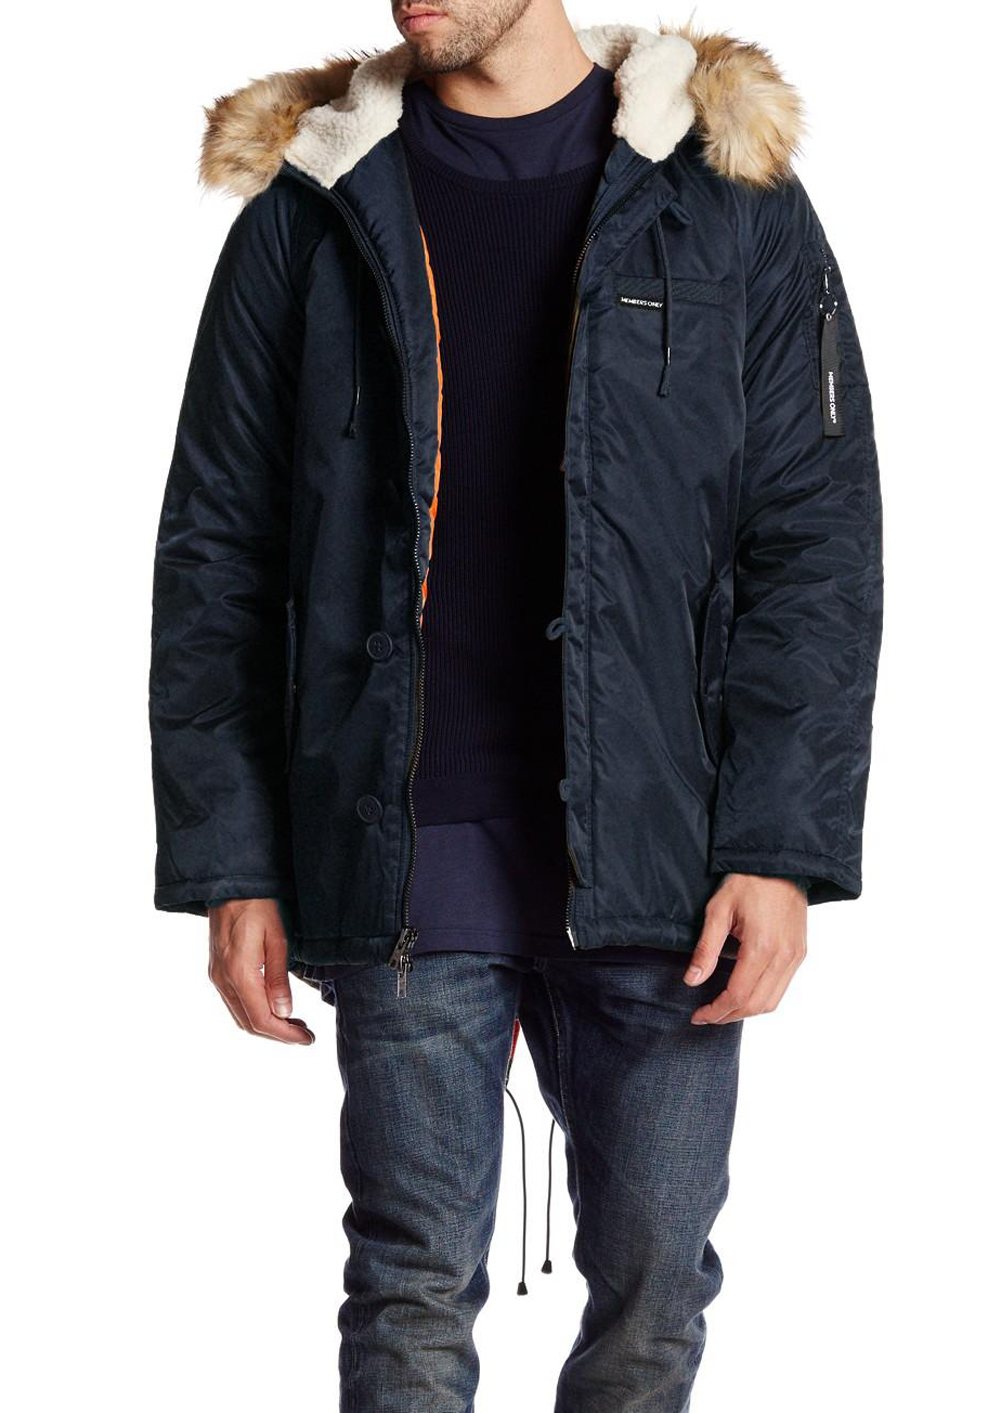 MEMBERS ONLY Men's Navy Military Hooded Long Parka Sz XL $215 NEW ...